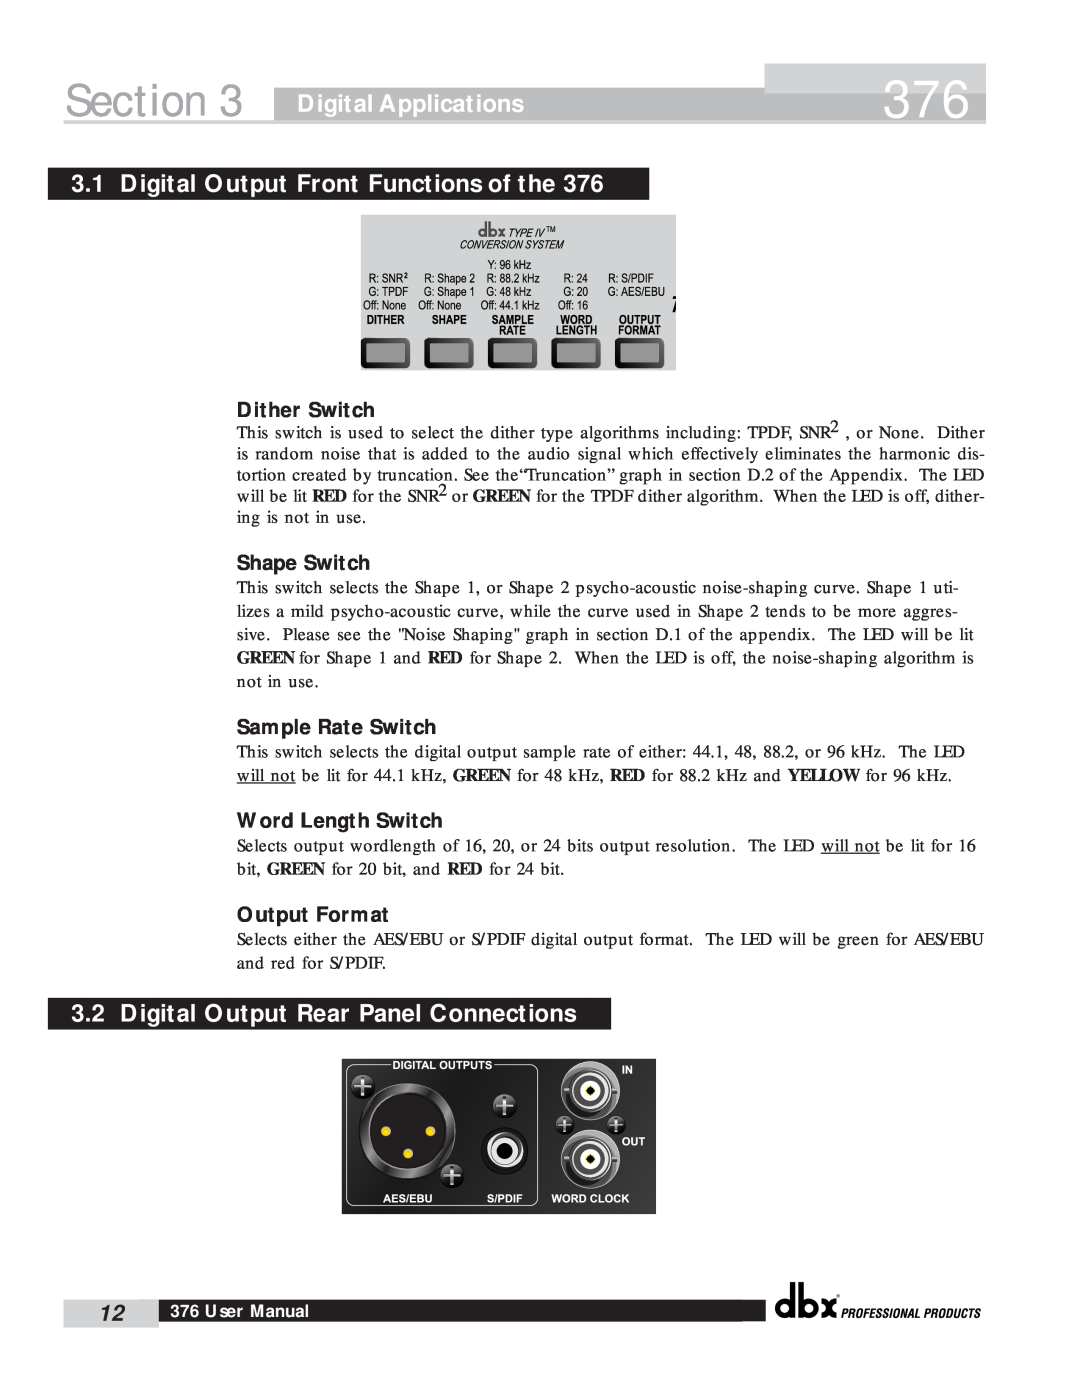 dbx Pro 376 Digital Applications, Digital Output Front Functions of the, Digital Output Rear Panel Connections, Section 